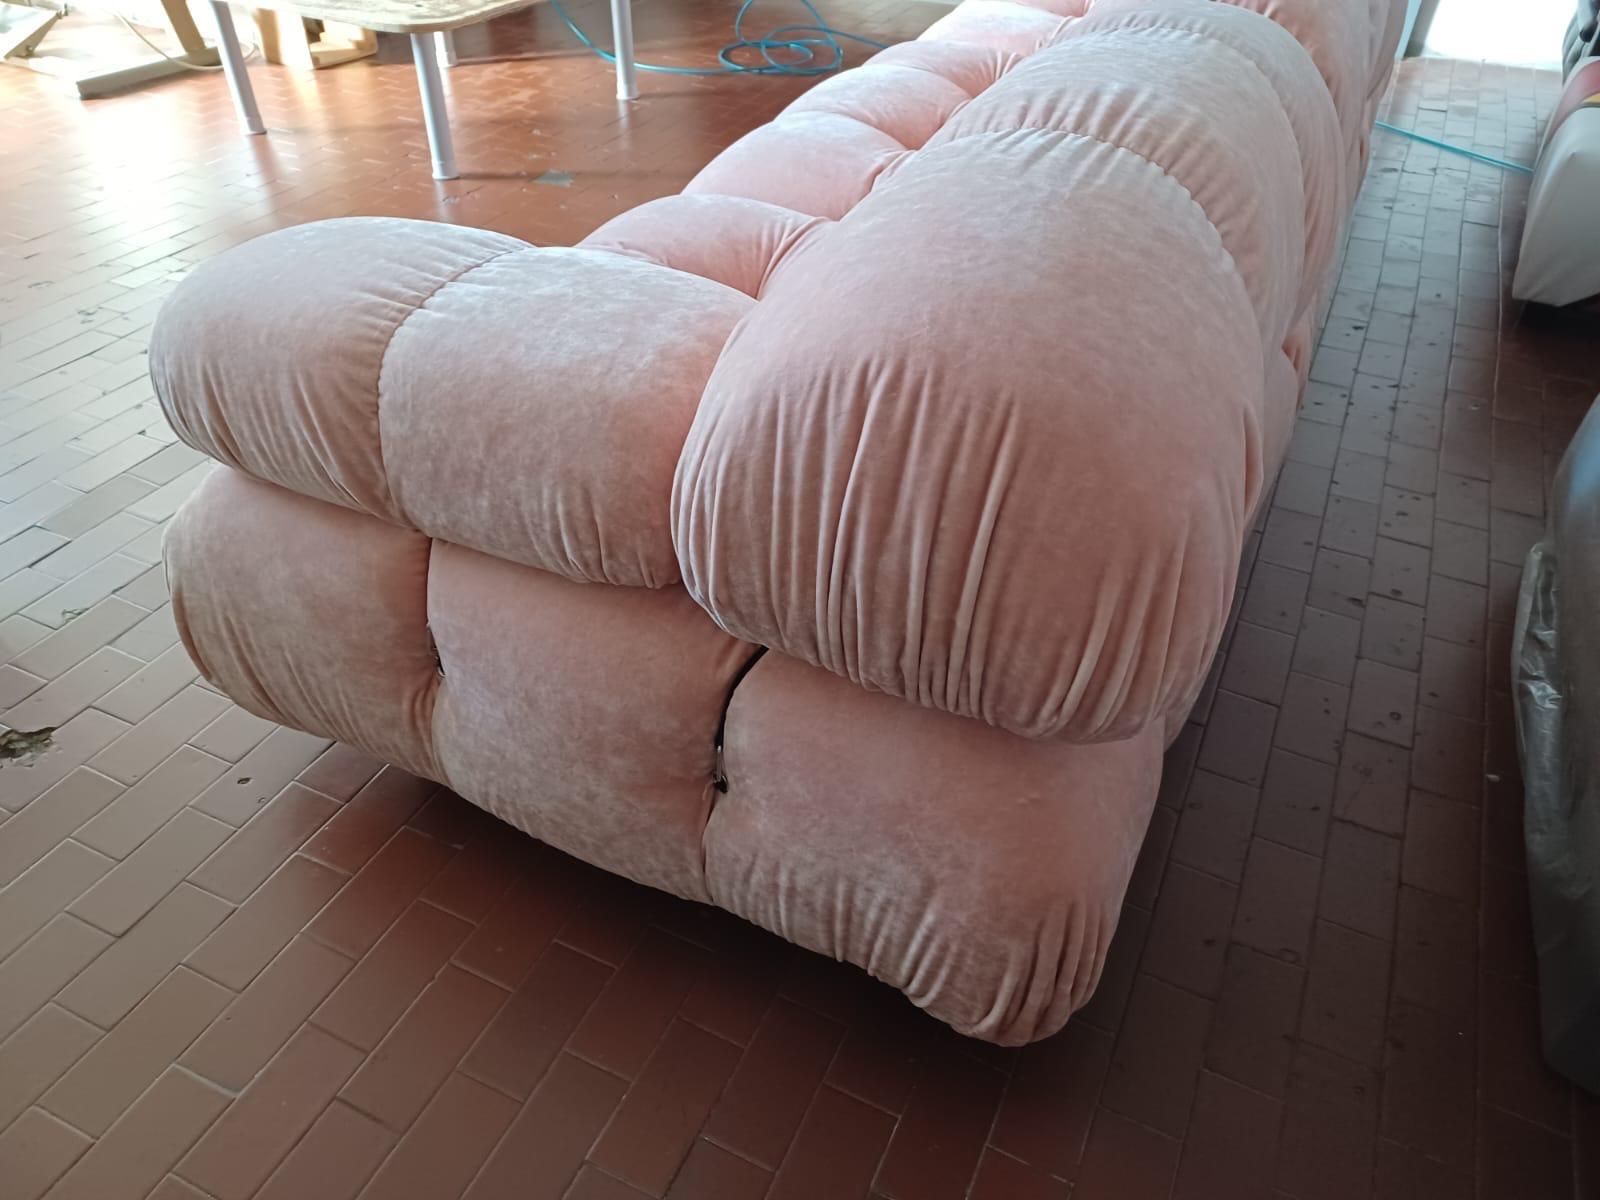  First  edition Mario Bellini Camaleonda modular sofa. Consists of three seats, all with backs and two arms. 

This is an original 1970s edition recovered in a beautiful Italian think pile peach/pink velvet. Each chair has a sticker which is signed